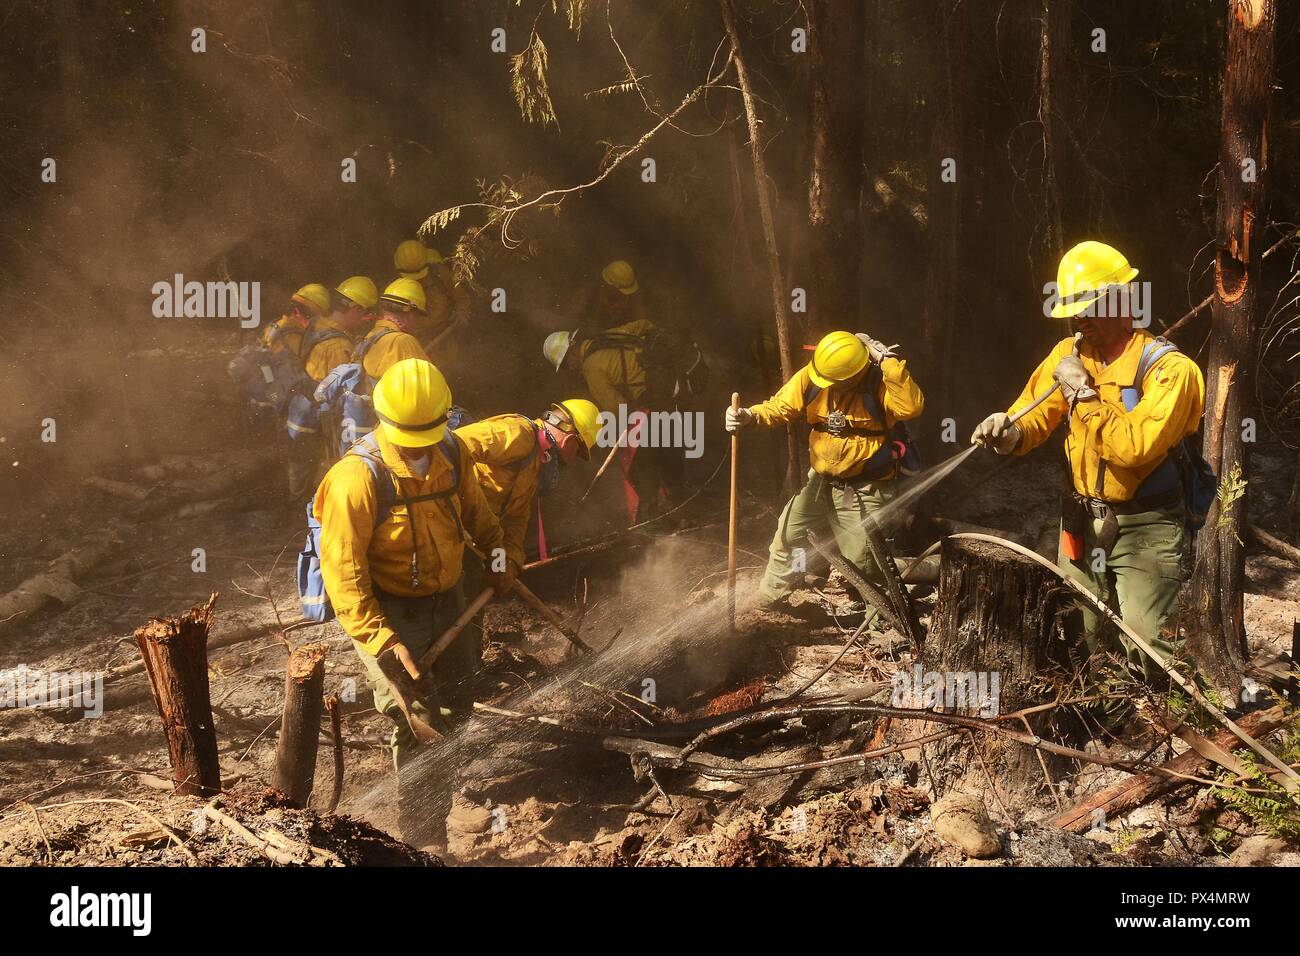 Airmen from the Washington Air National Guard search for remaining embers in a forested area, one in the right foreground uses a hose to dampen the ground, while fighting the Sheep Creek Fire, located in the Sheep Creek area near Northport, Washington, USA, image courtesy Technical sergeant Timothy Chacon and the Joint Forces Headquarters, Washington National Guard, August 6, 2018. () Stock Photo